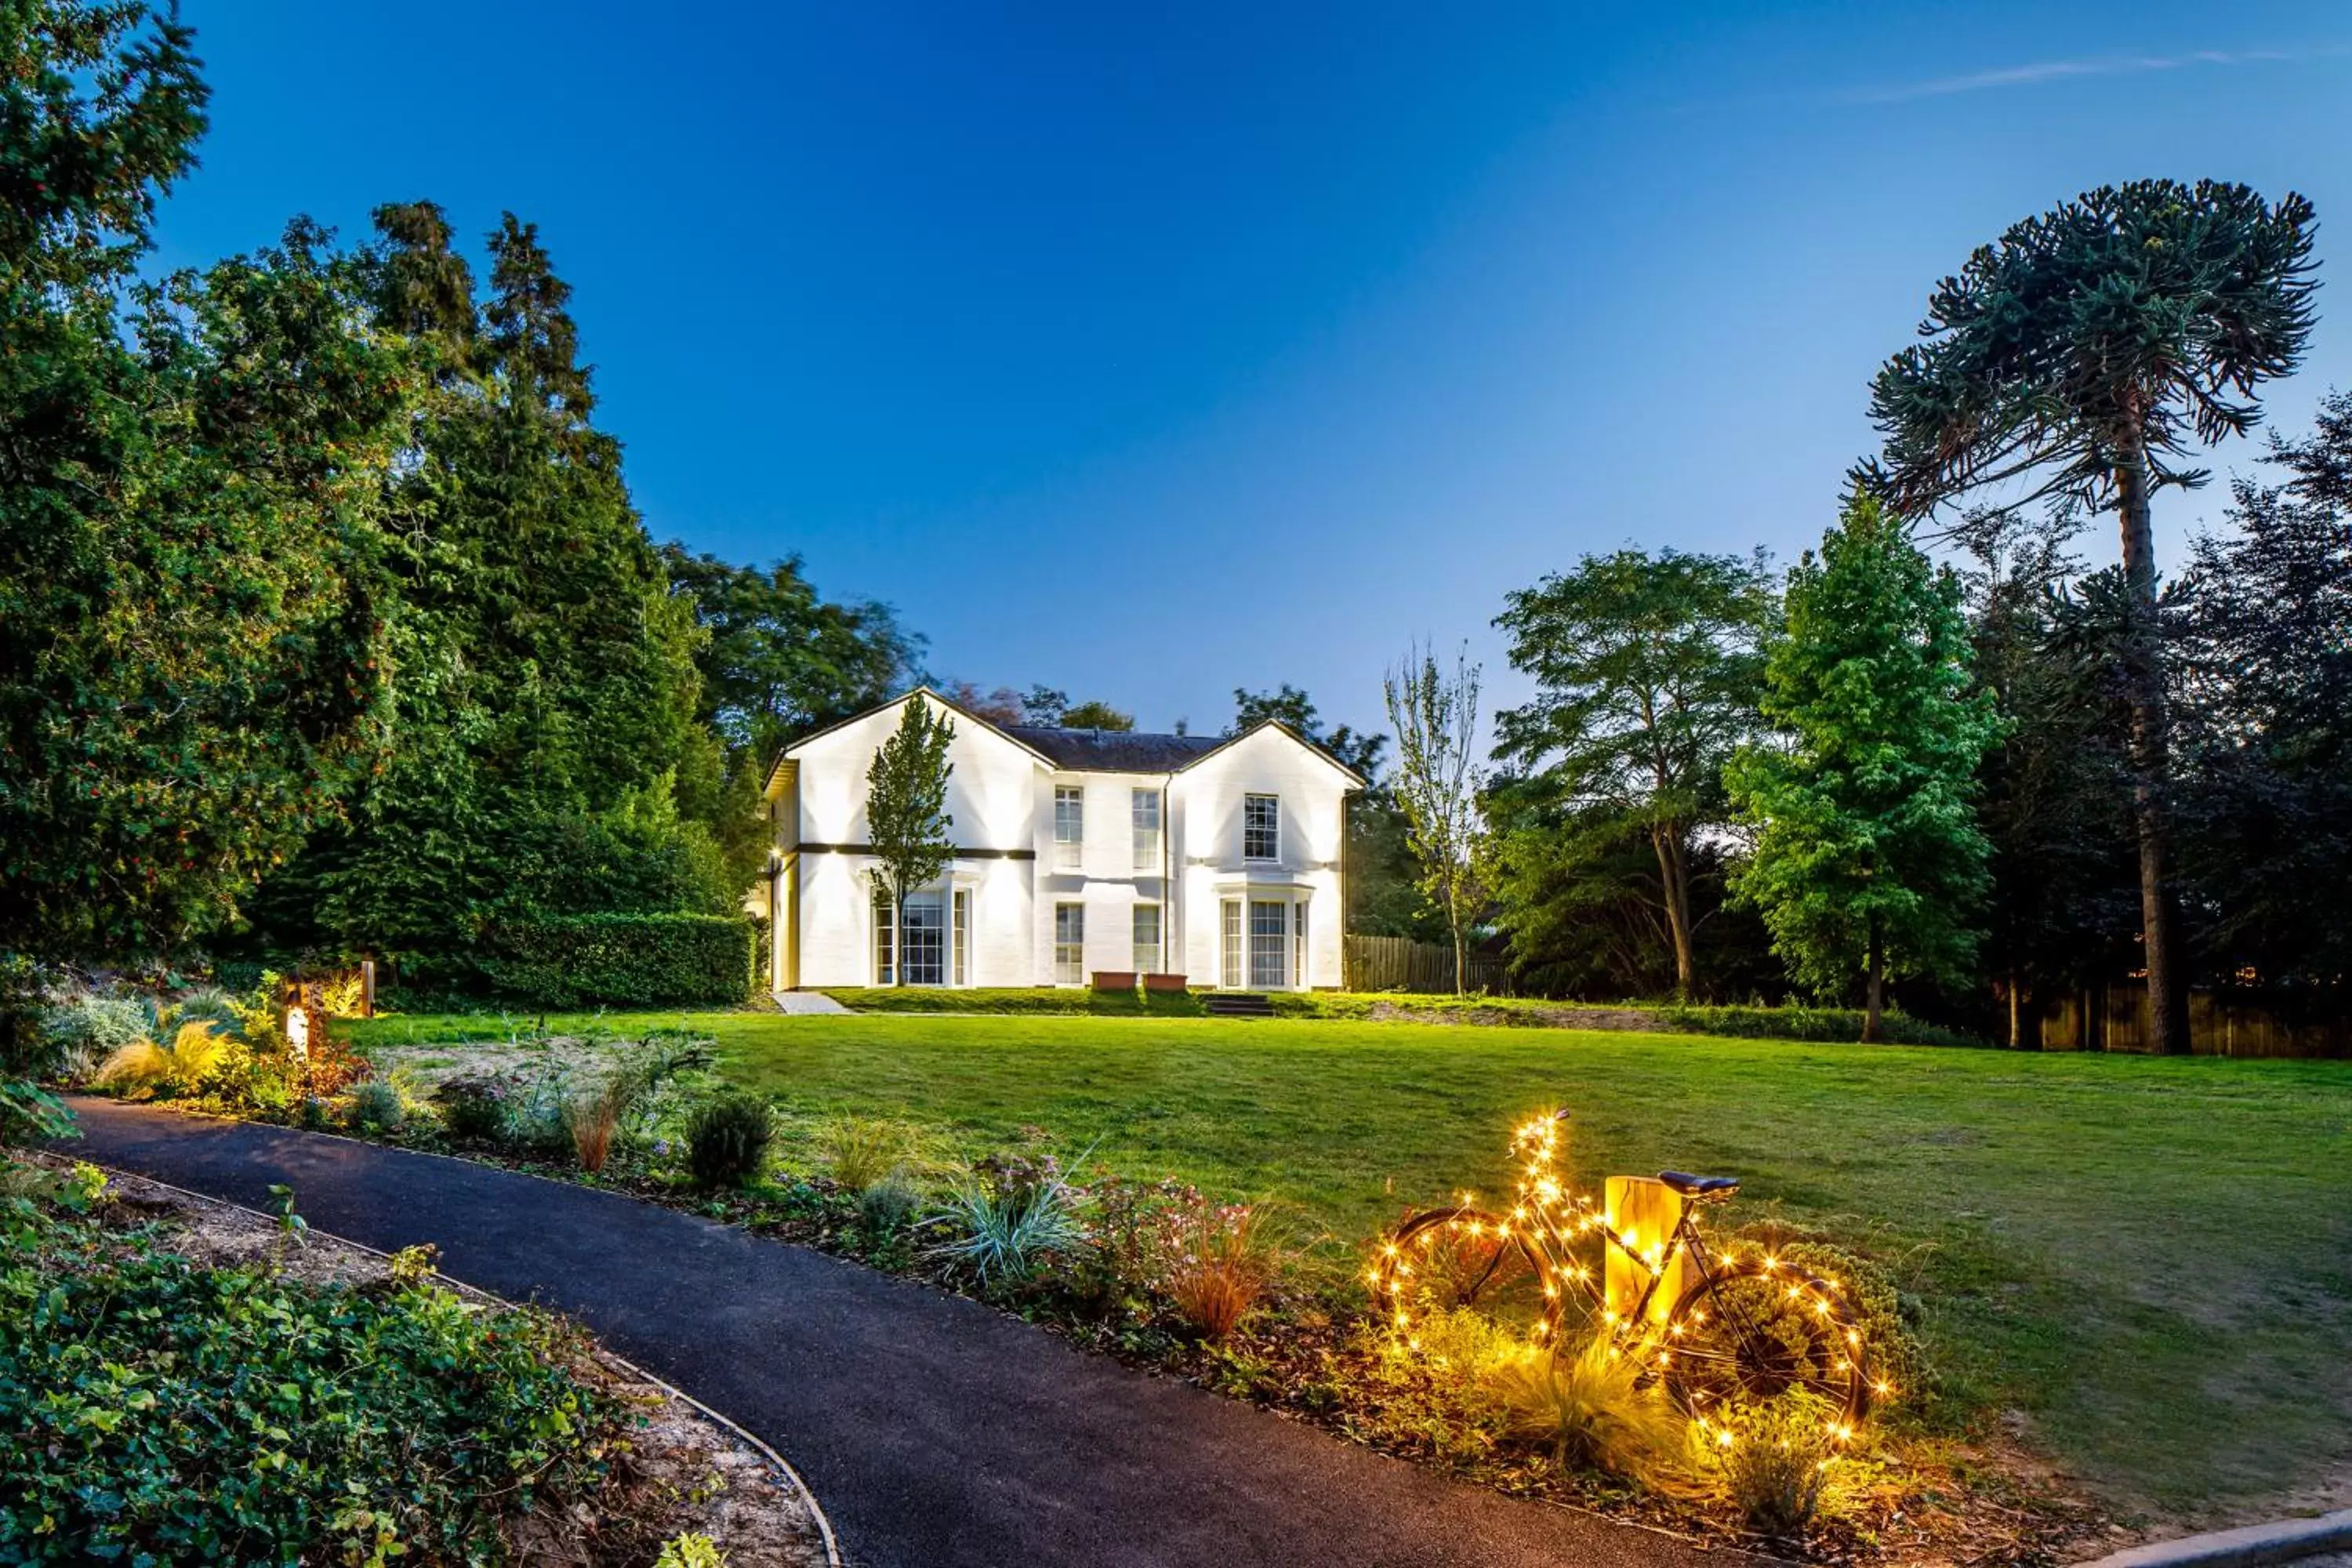 Property Building in Mercure Oxford Hawkwell House Hotel